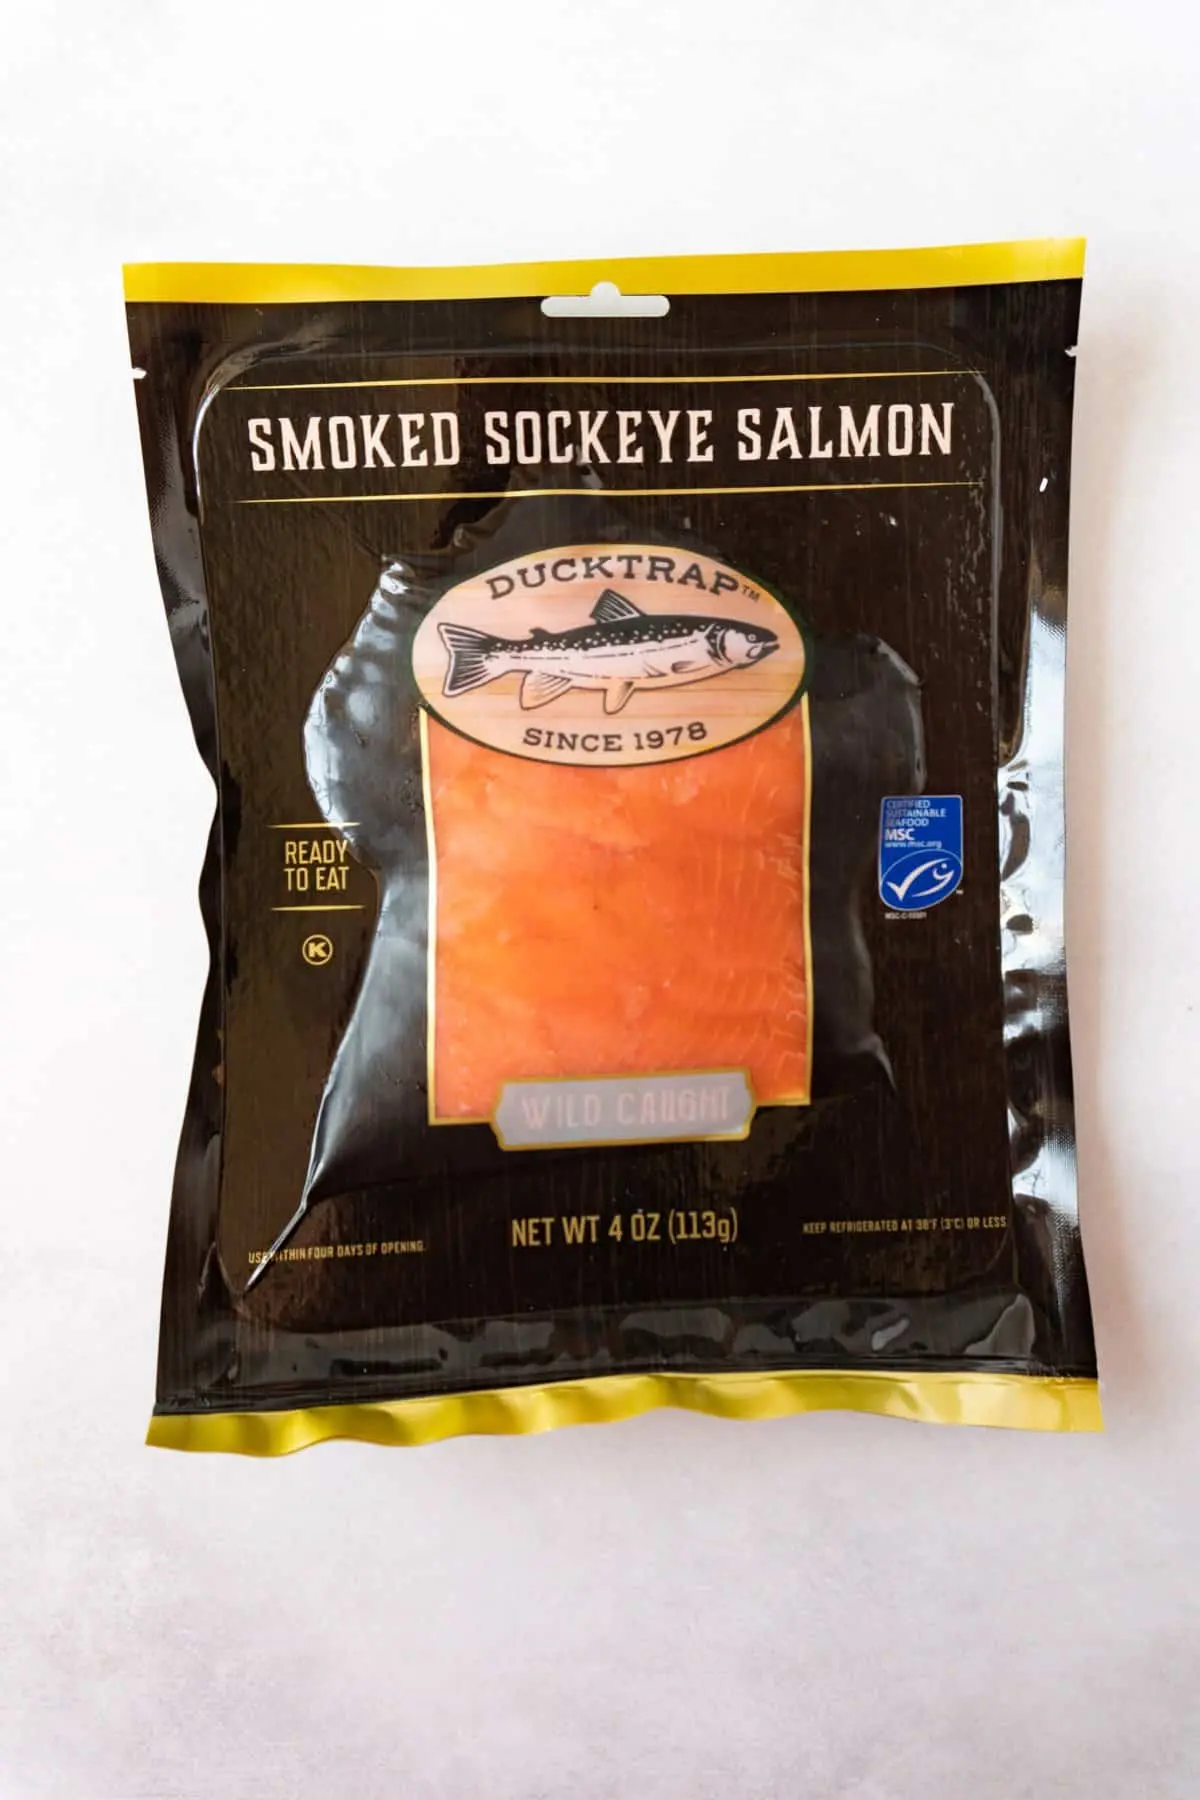 how long does smoked salmon last - How long is smoked salmon good for in the fridge